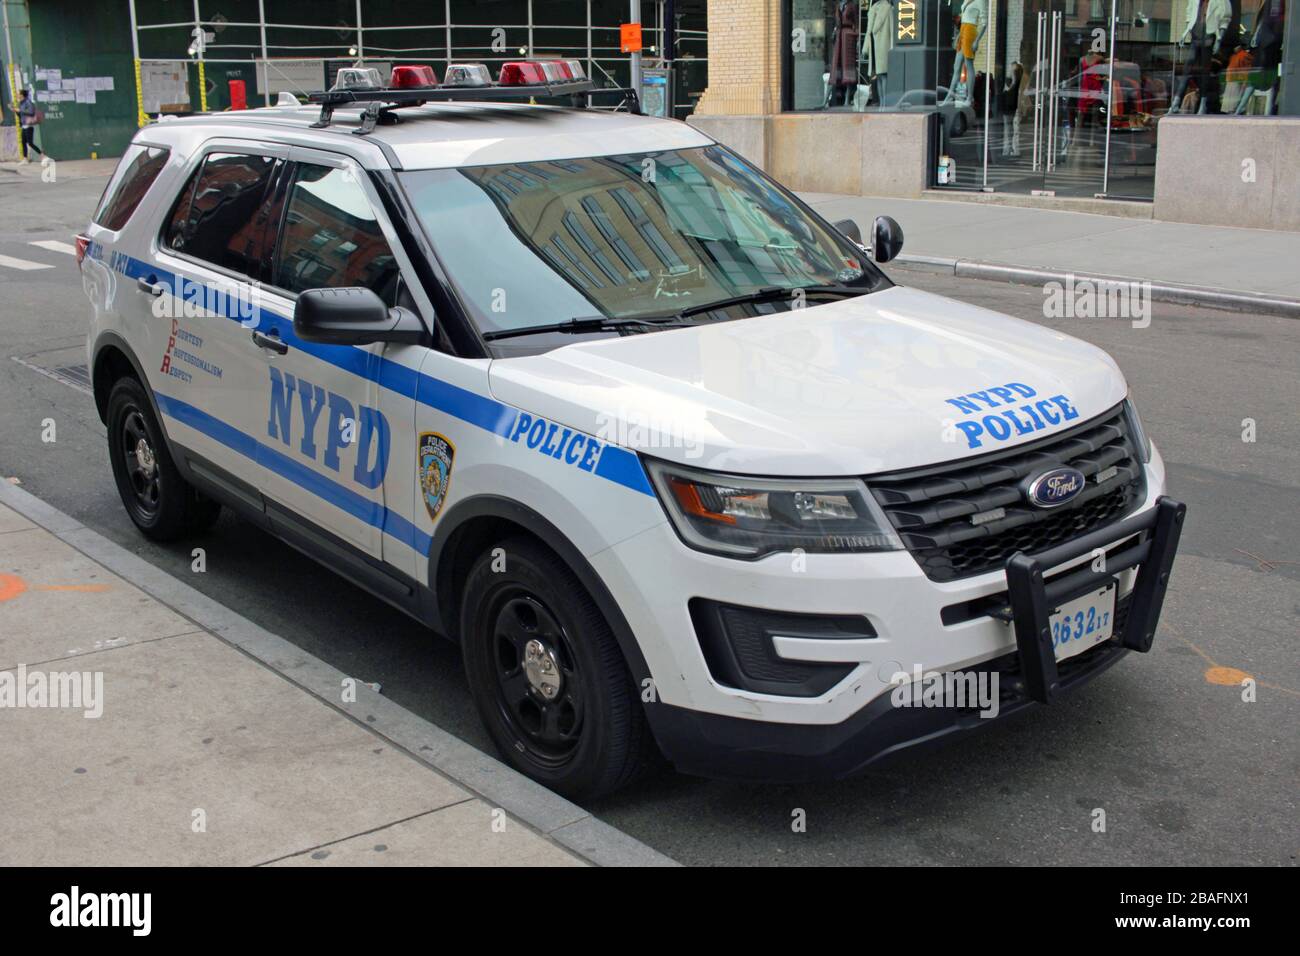 NYPD vehicle, Meatpacking District, New York City, USA Stock Photo